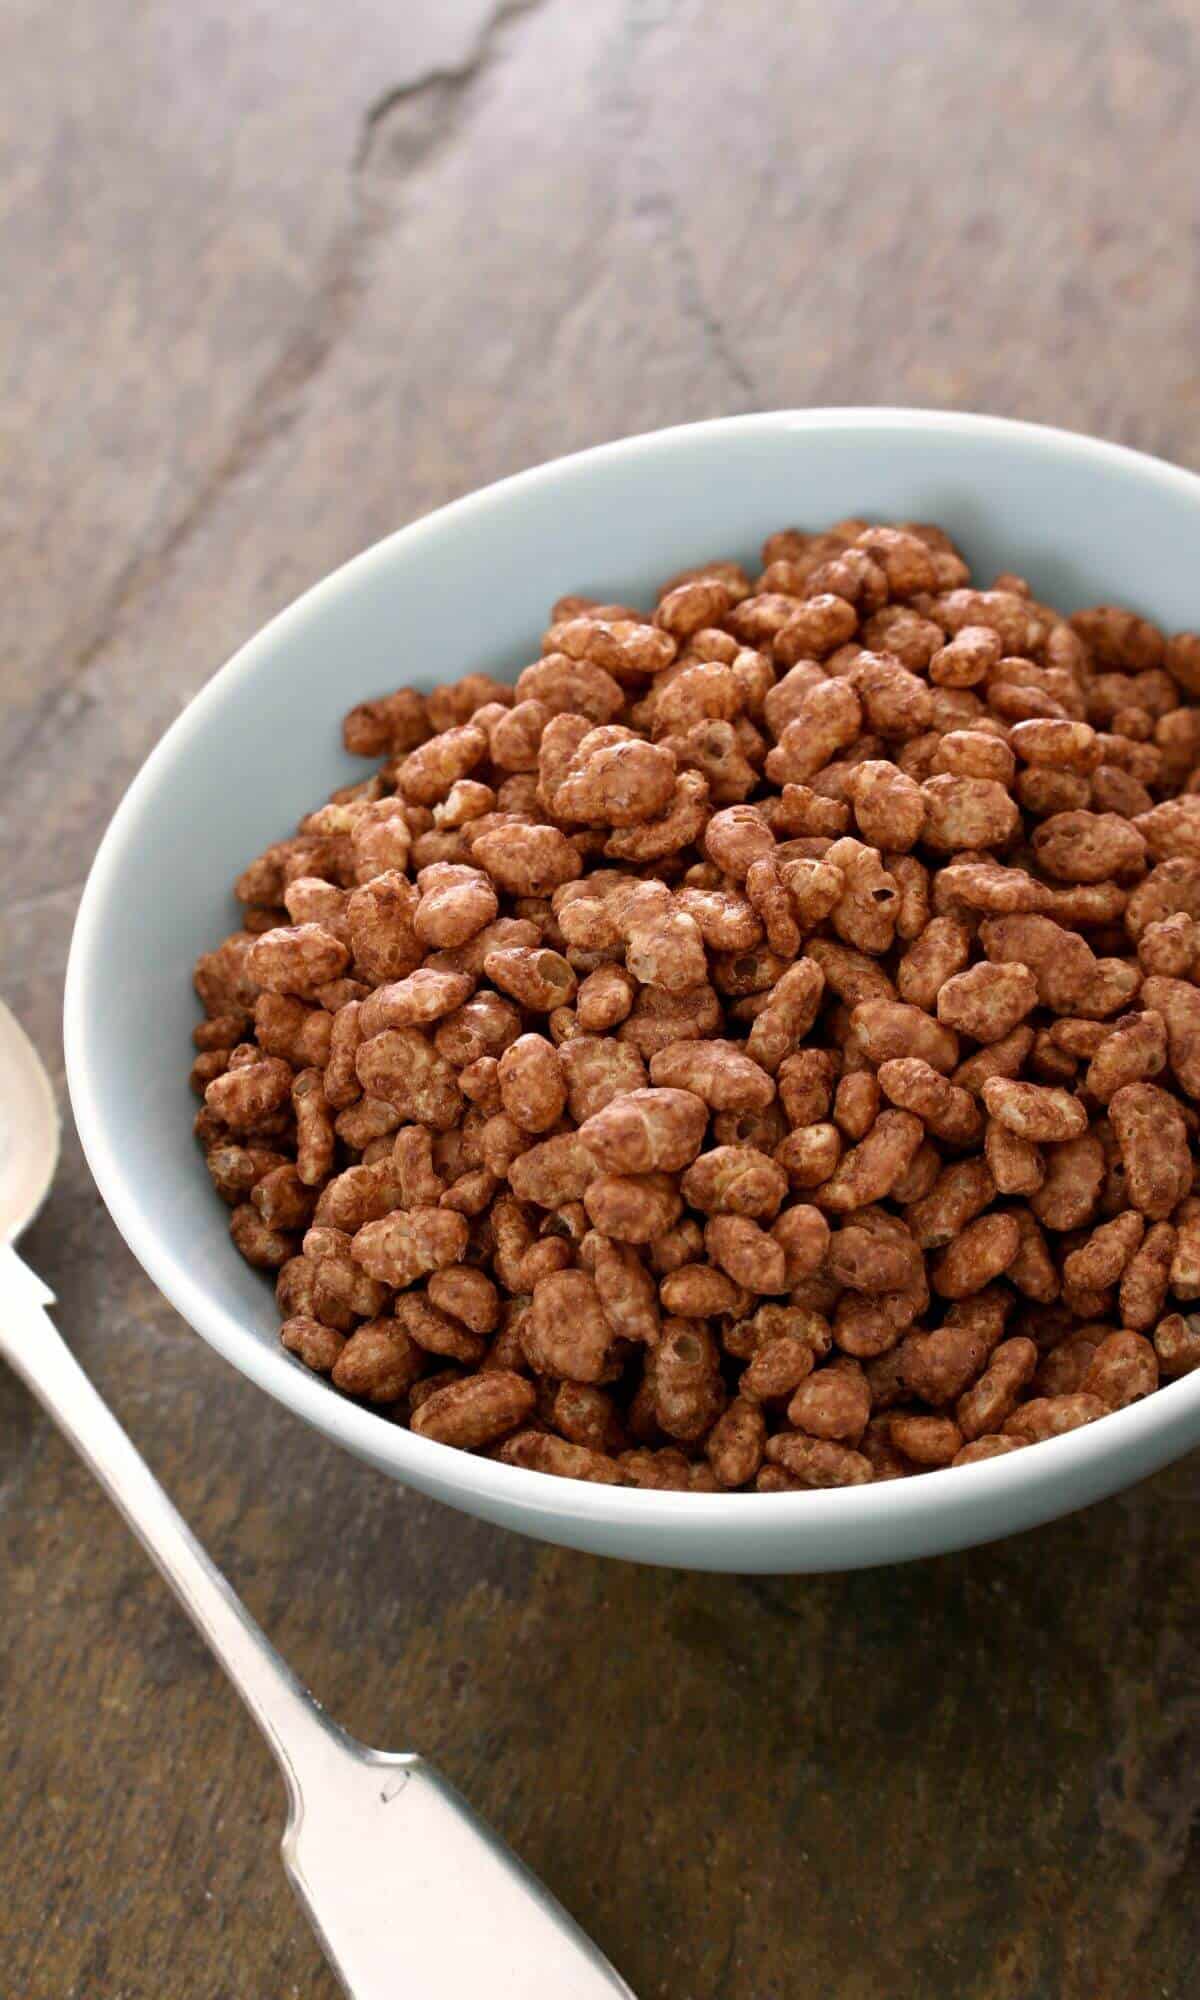 A white bowl filled with cocoa pebbles cereal next to a spoon.